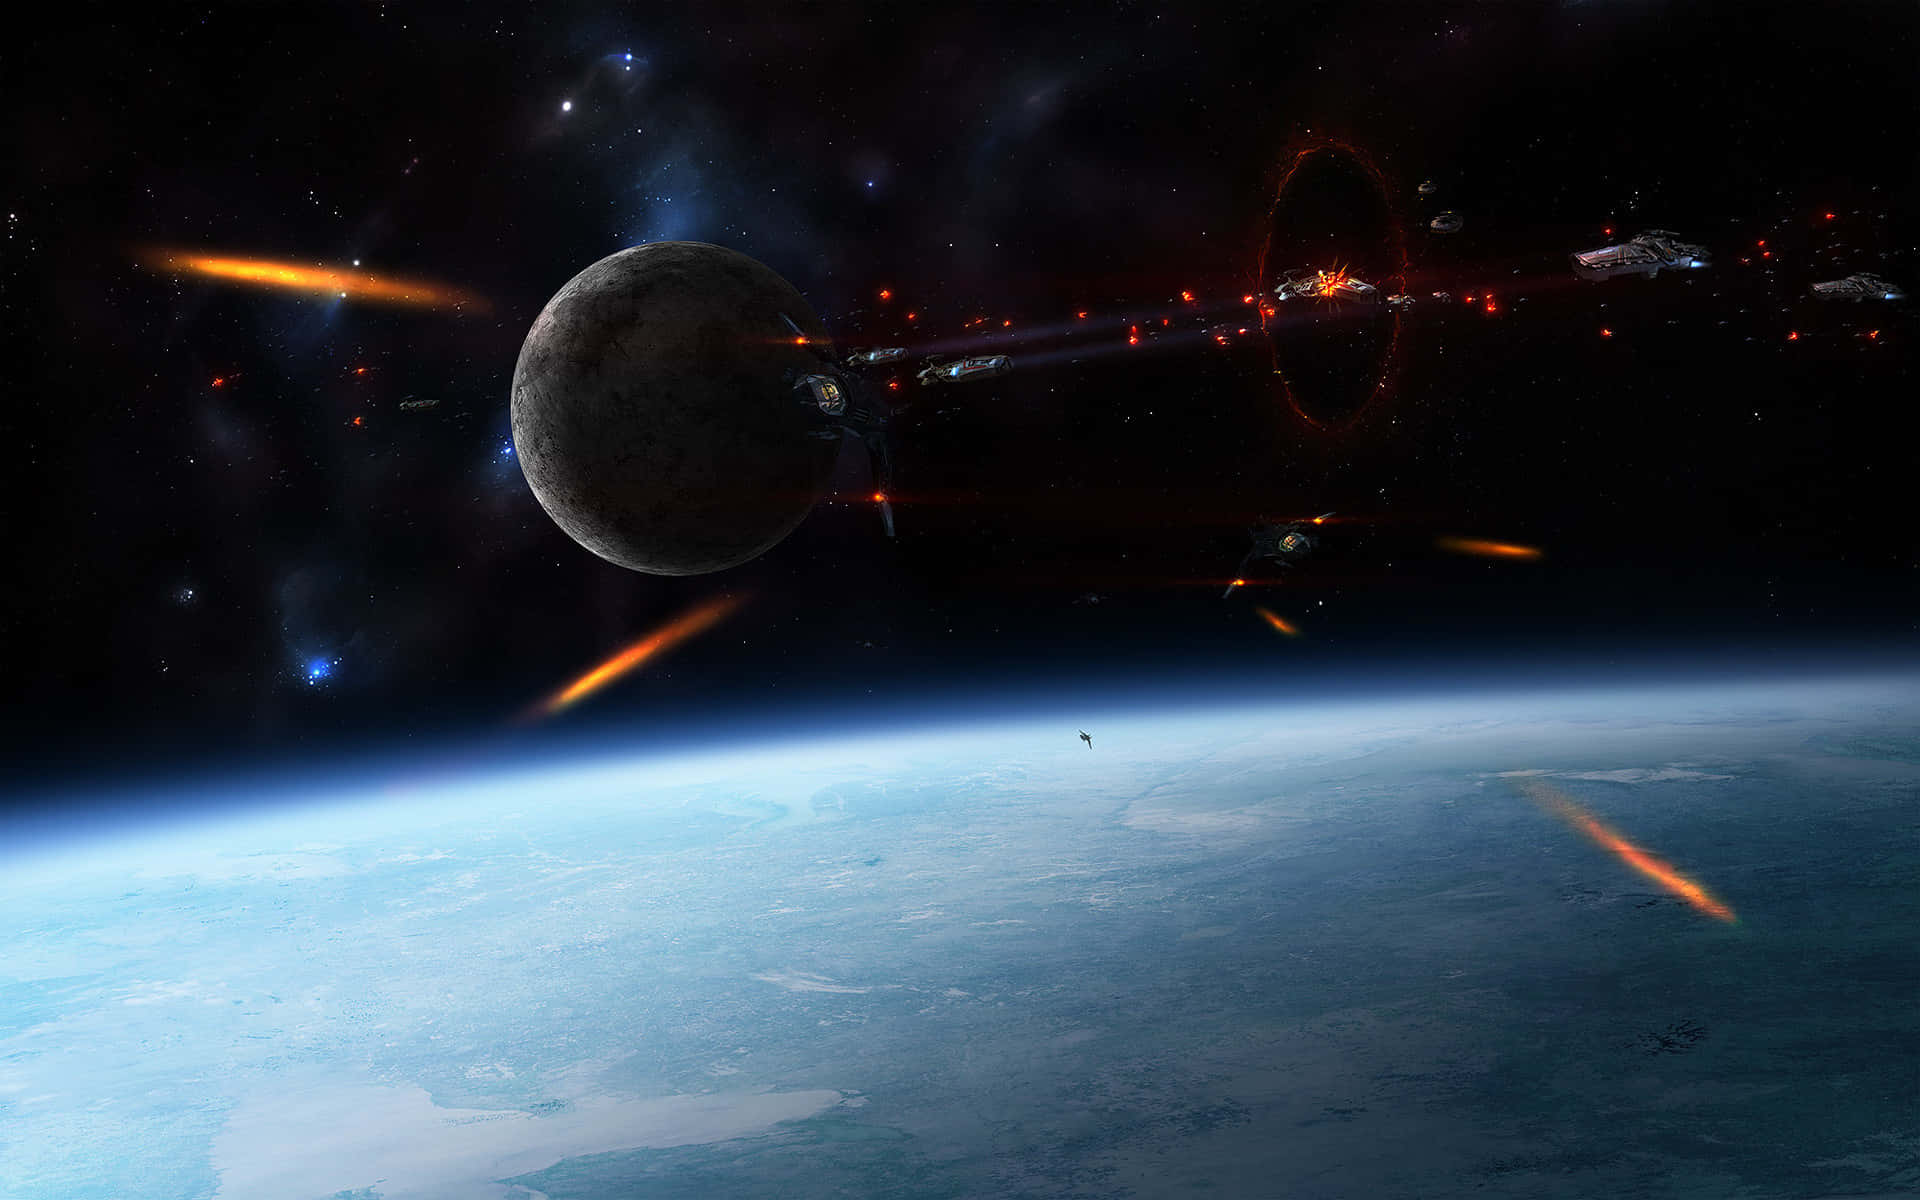 An Intense Space Battle in the Star Wars Universe